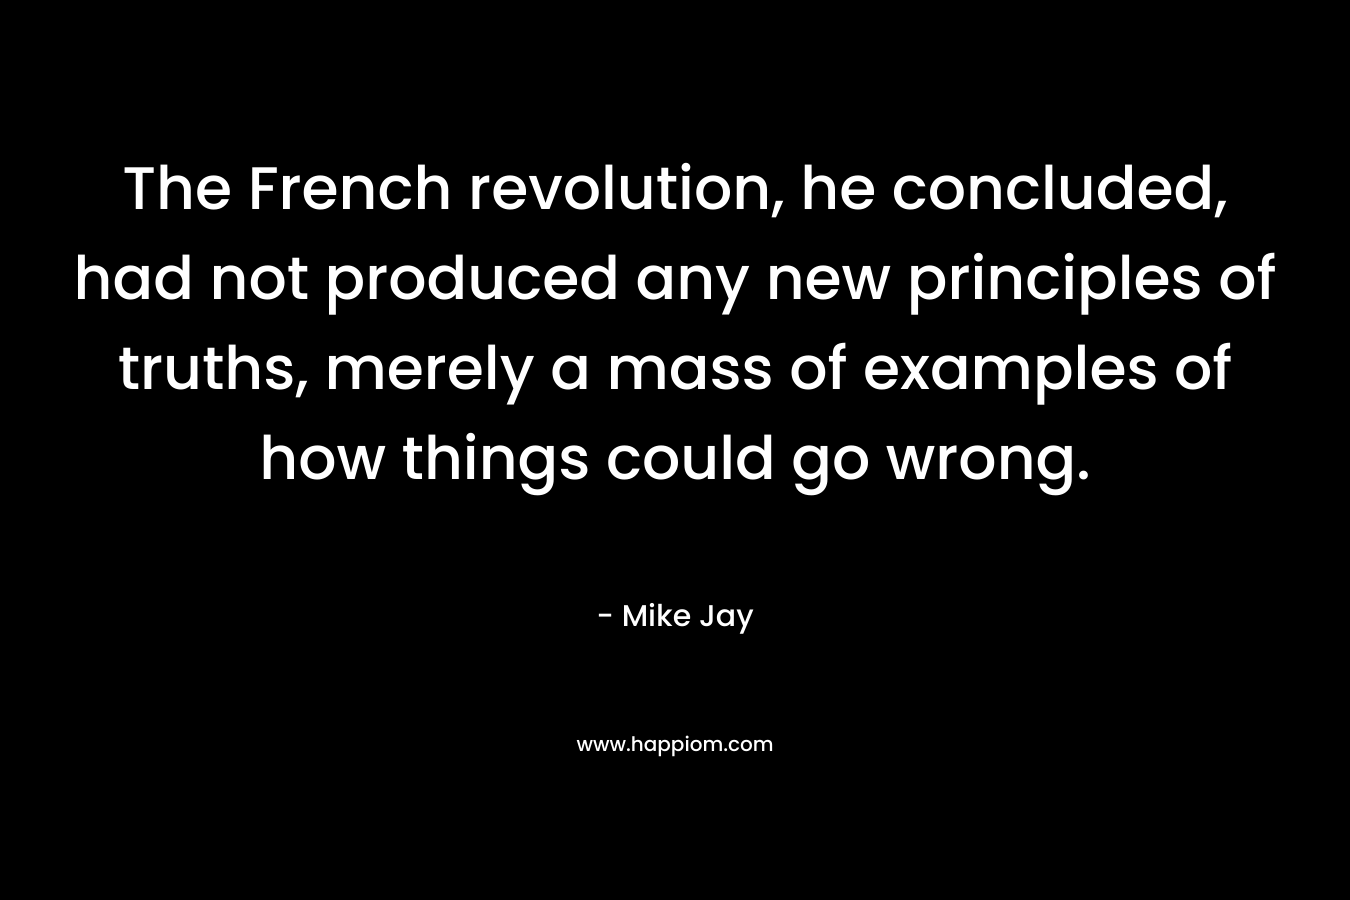 The French revolution, he concluded, had not produced any new principles of truths, merely a mass of examples of how things could go wrong. – Mike Jay